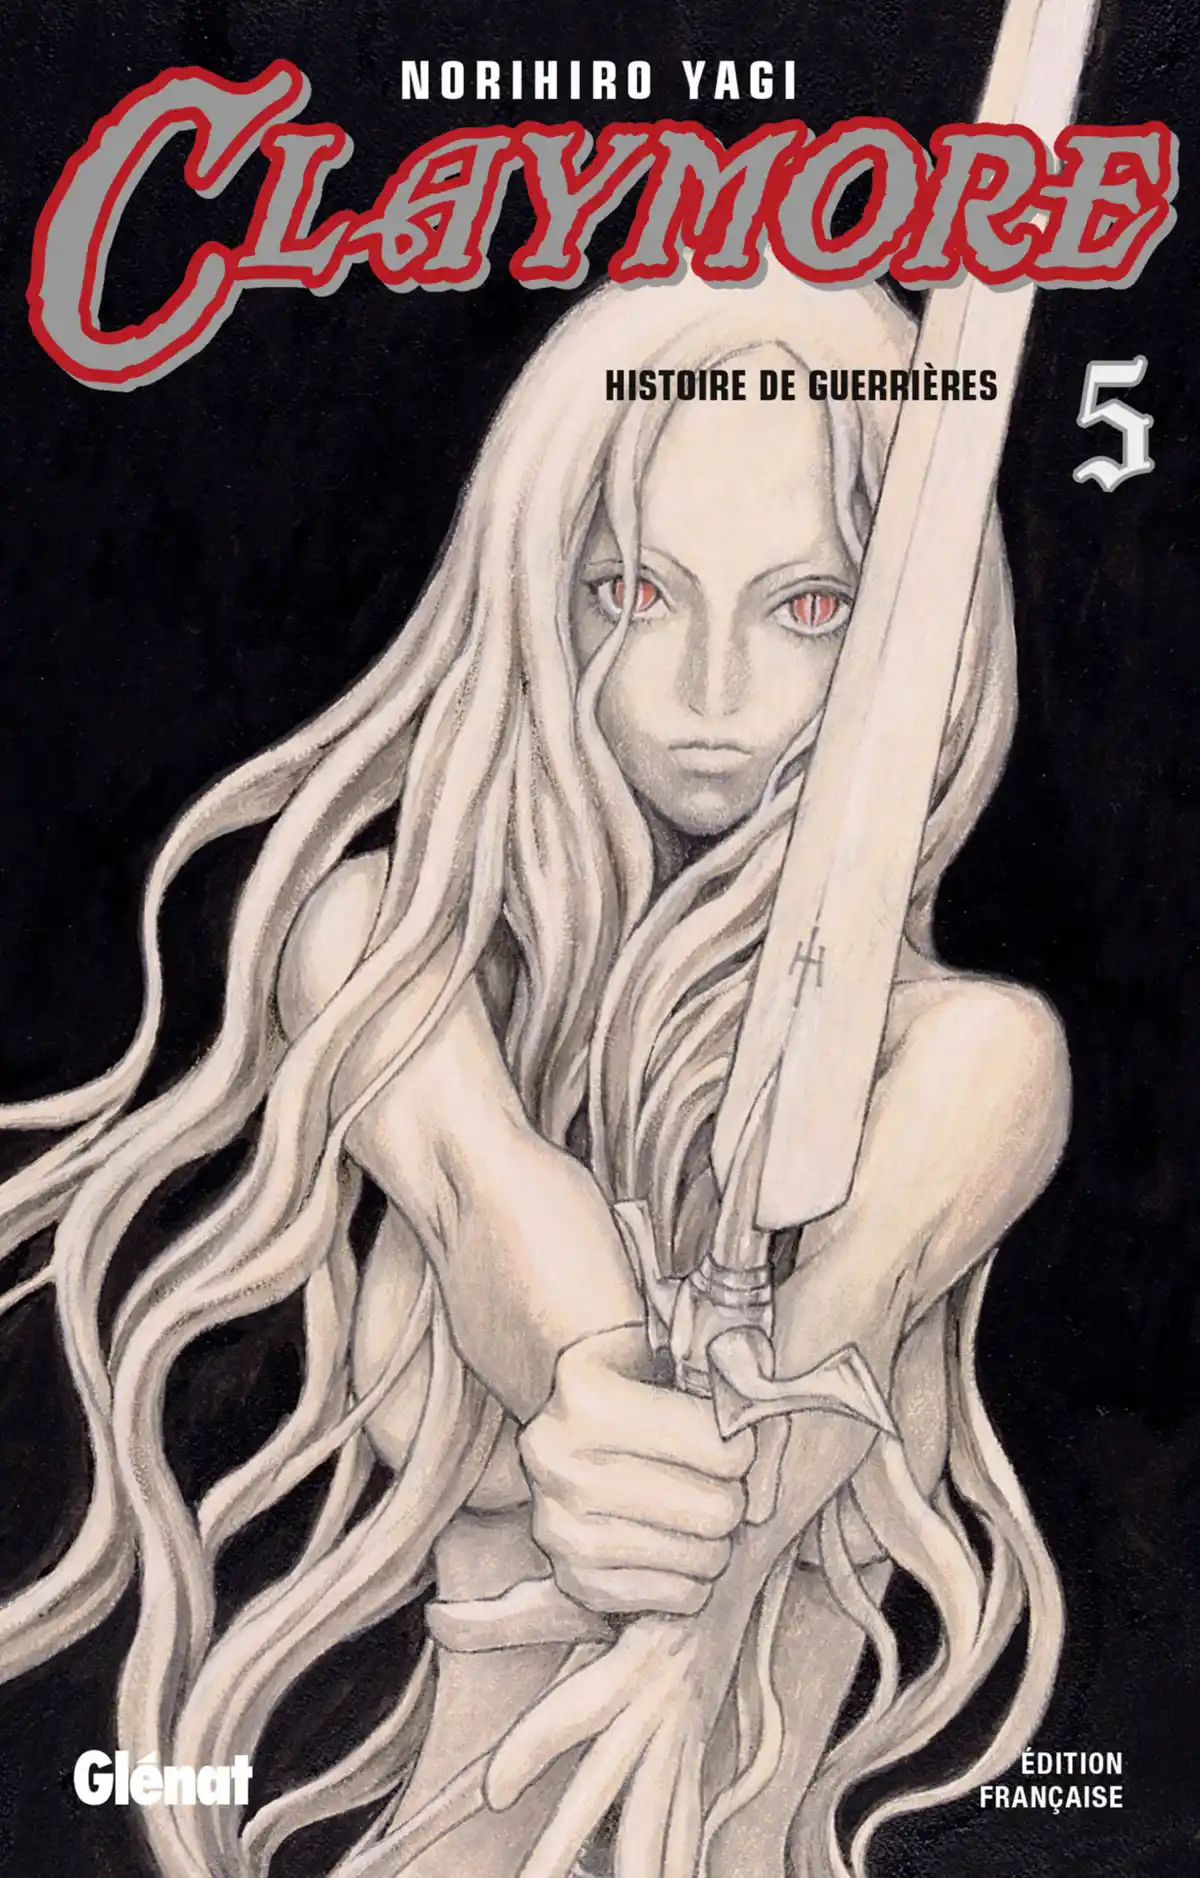 Claymore Volume 5 page 1